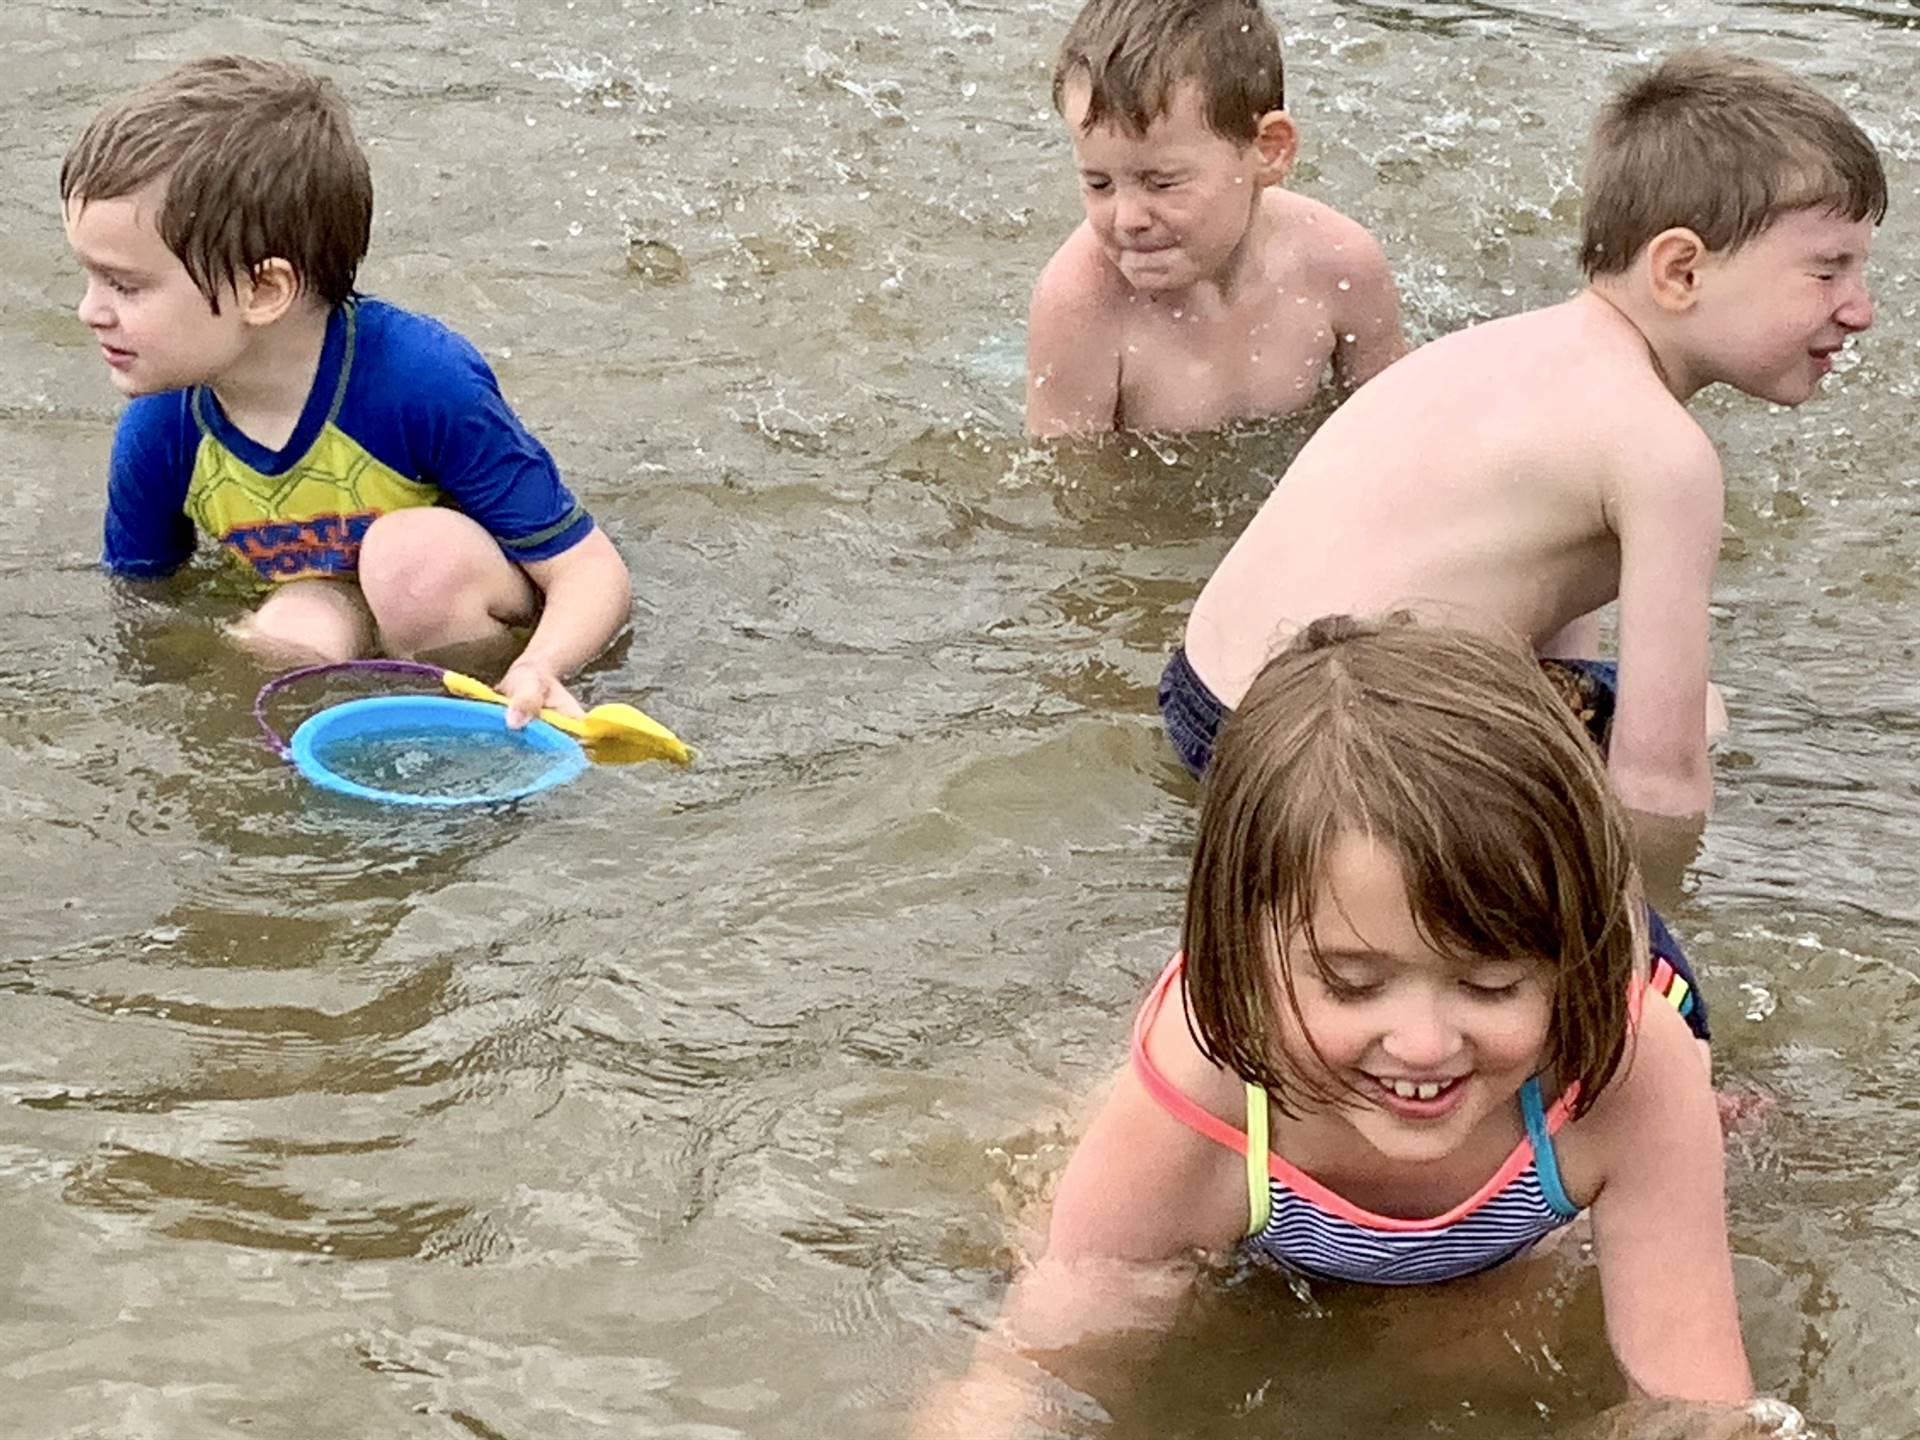 4 Students playing in the water.